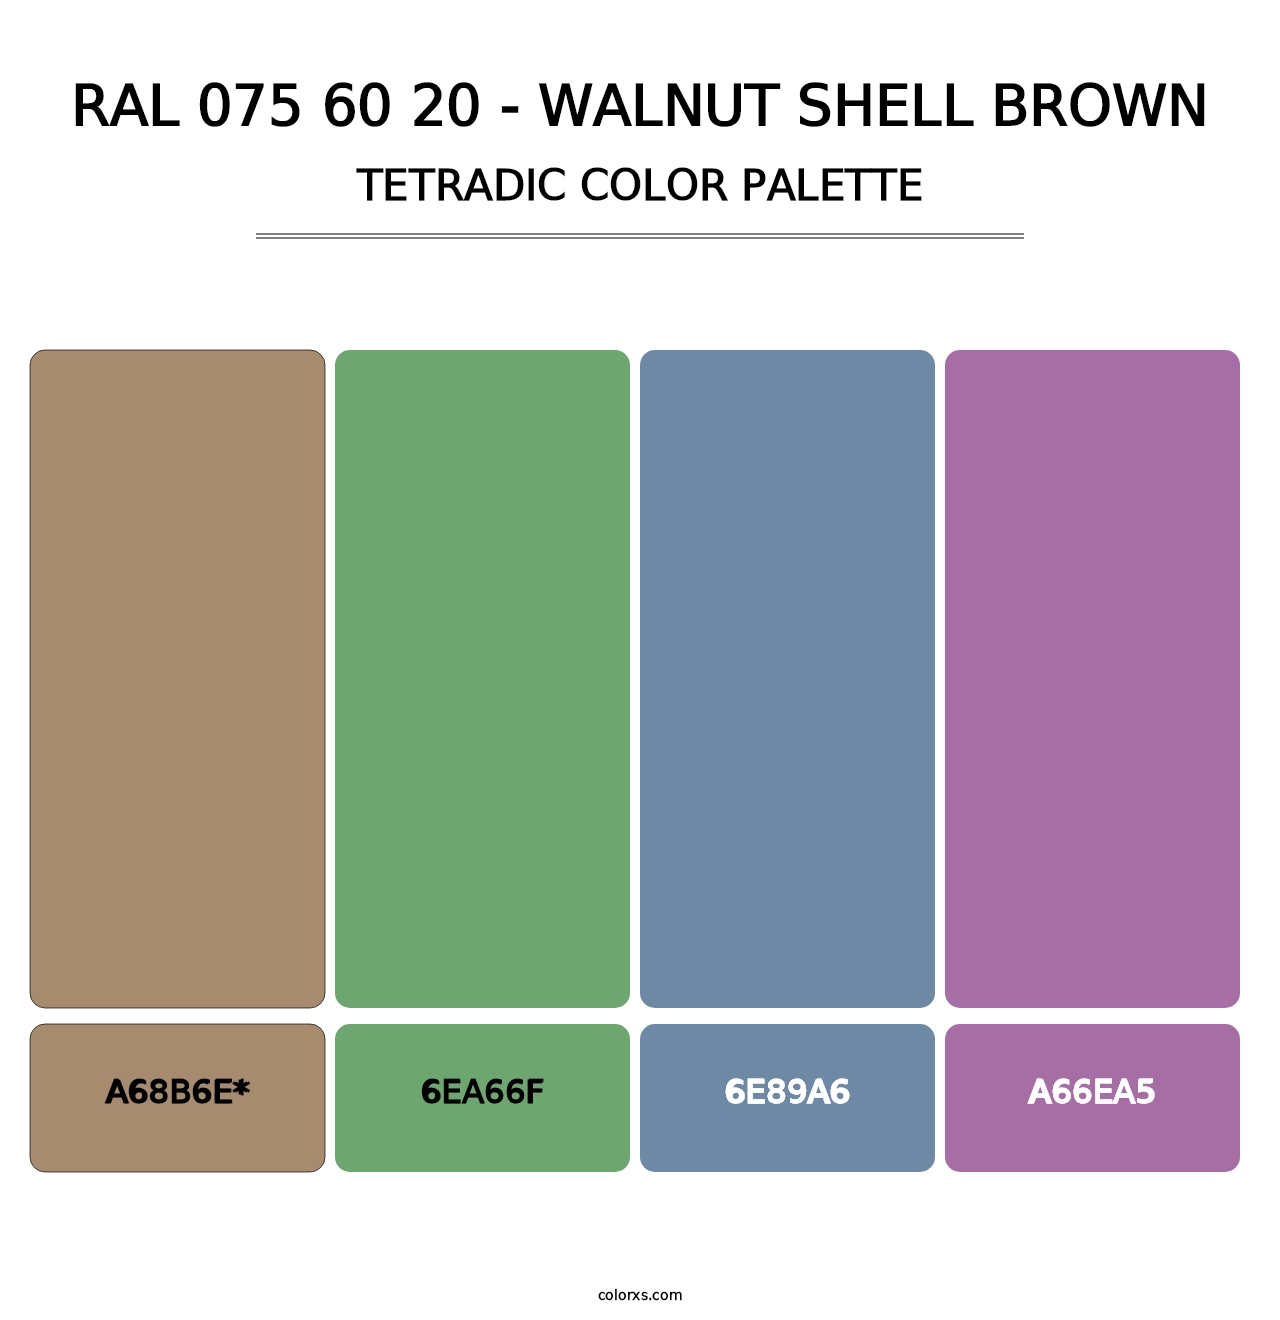 RAL 075 60 20 - Walnut Shell Brown - Tetradic Color Palette